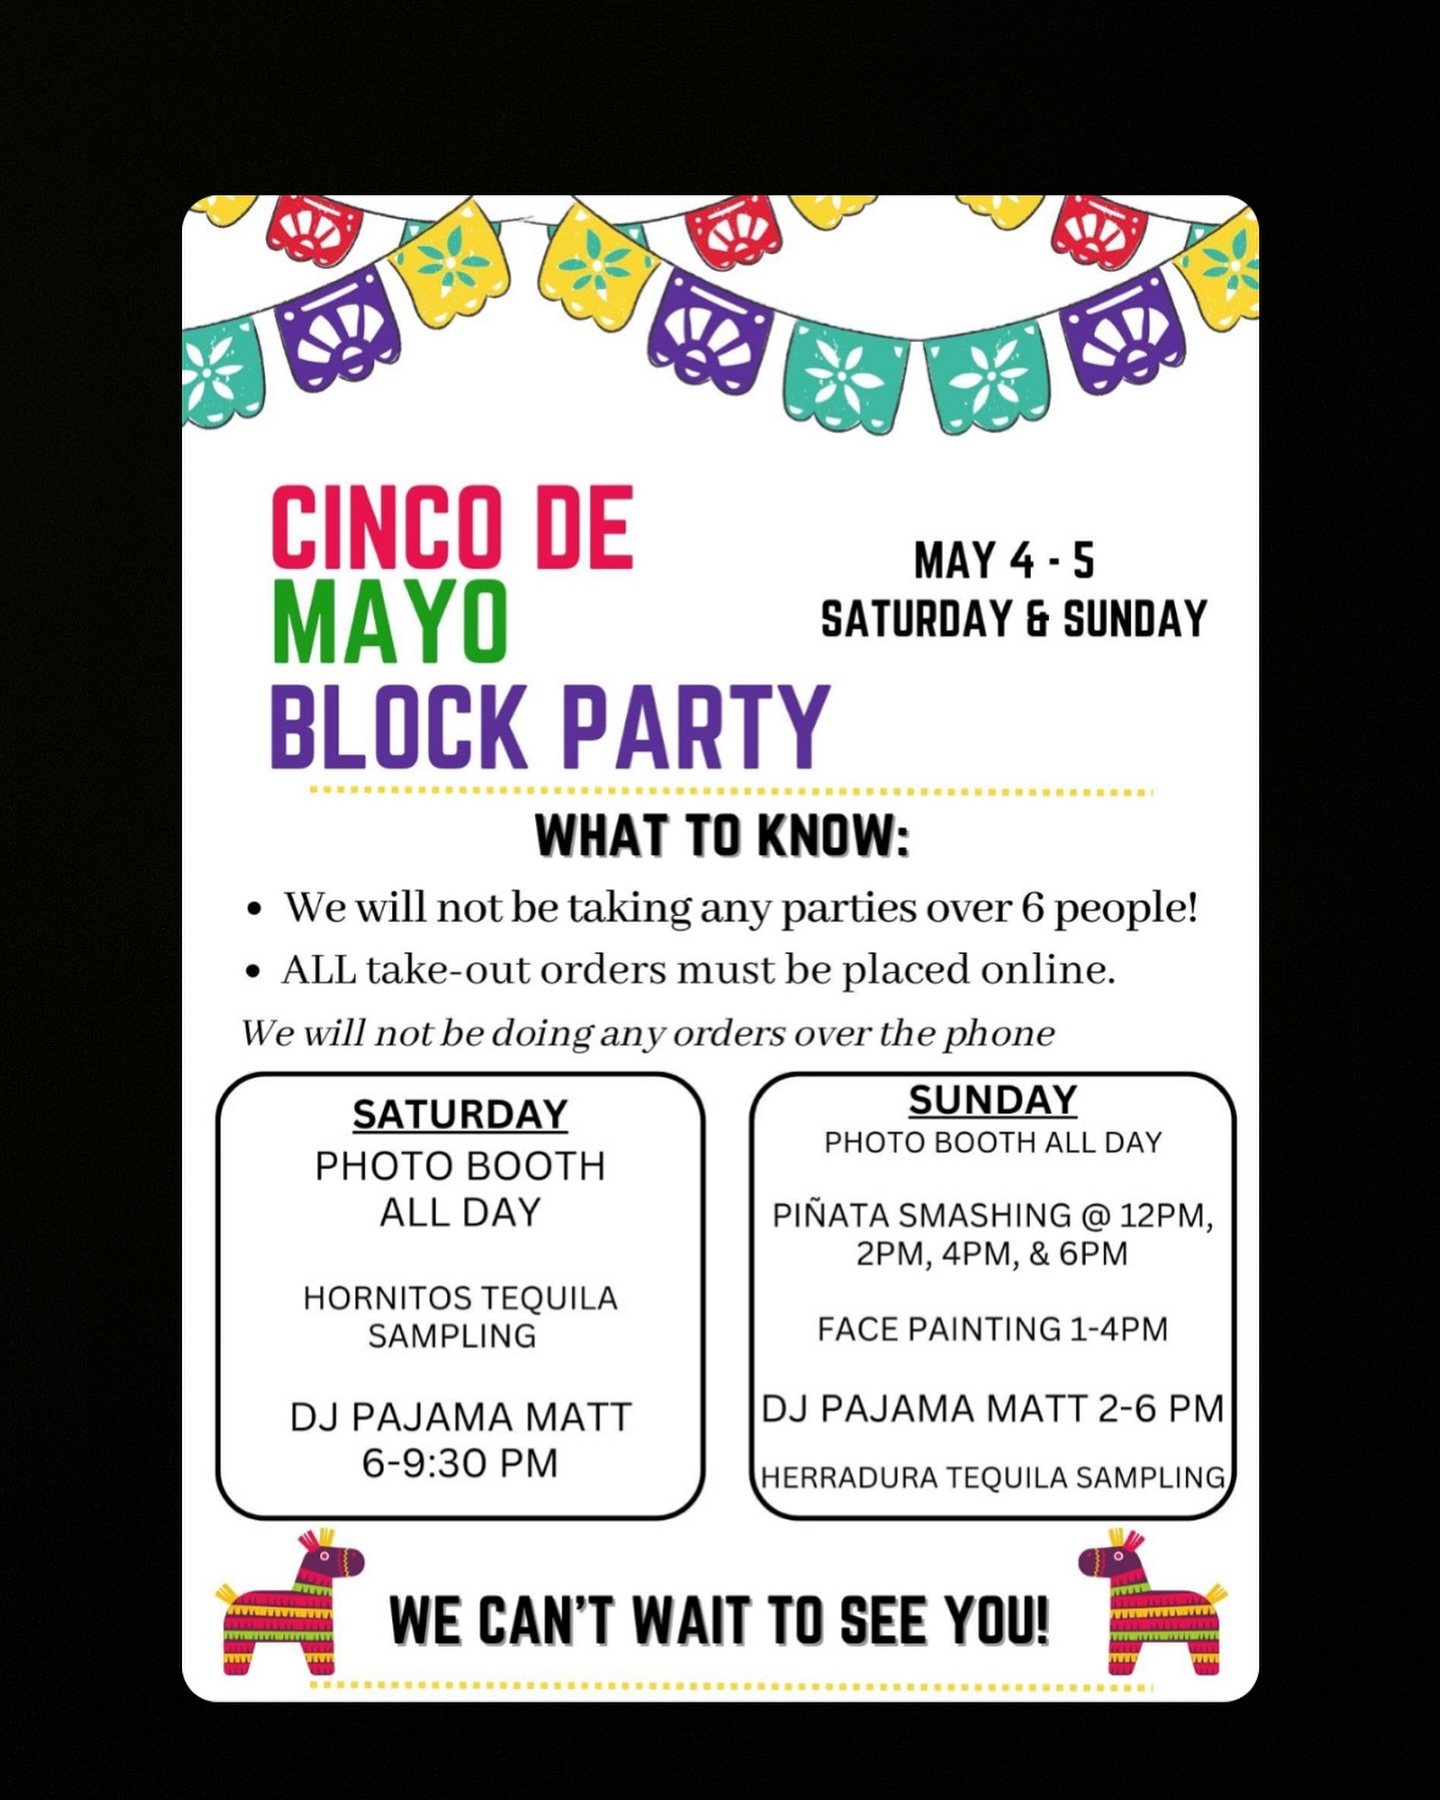 TOMORROW IS THE BIG DAY! If you plan on visiting us Saturday or Sunday for our annual Cinco De Mayo Block Party, please read this! We CAN NOT wait to see you!!